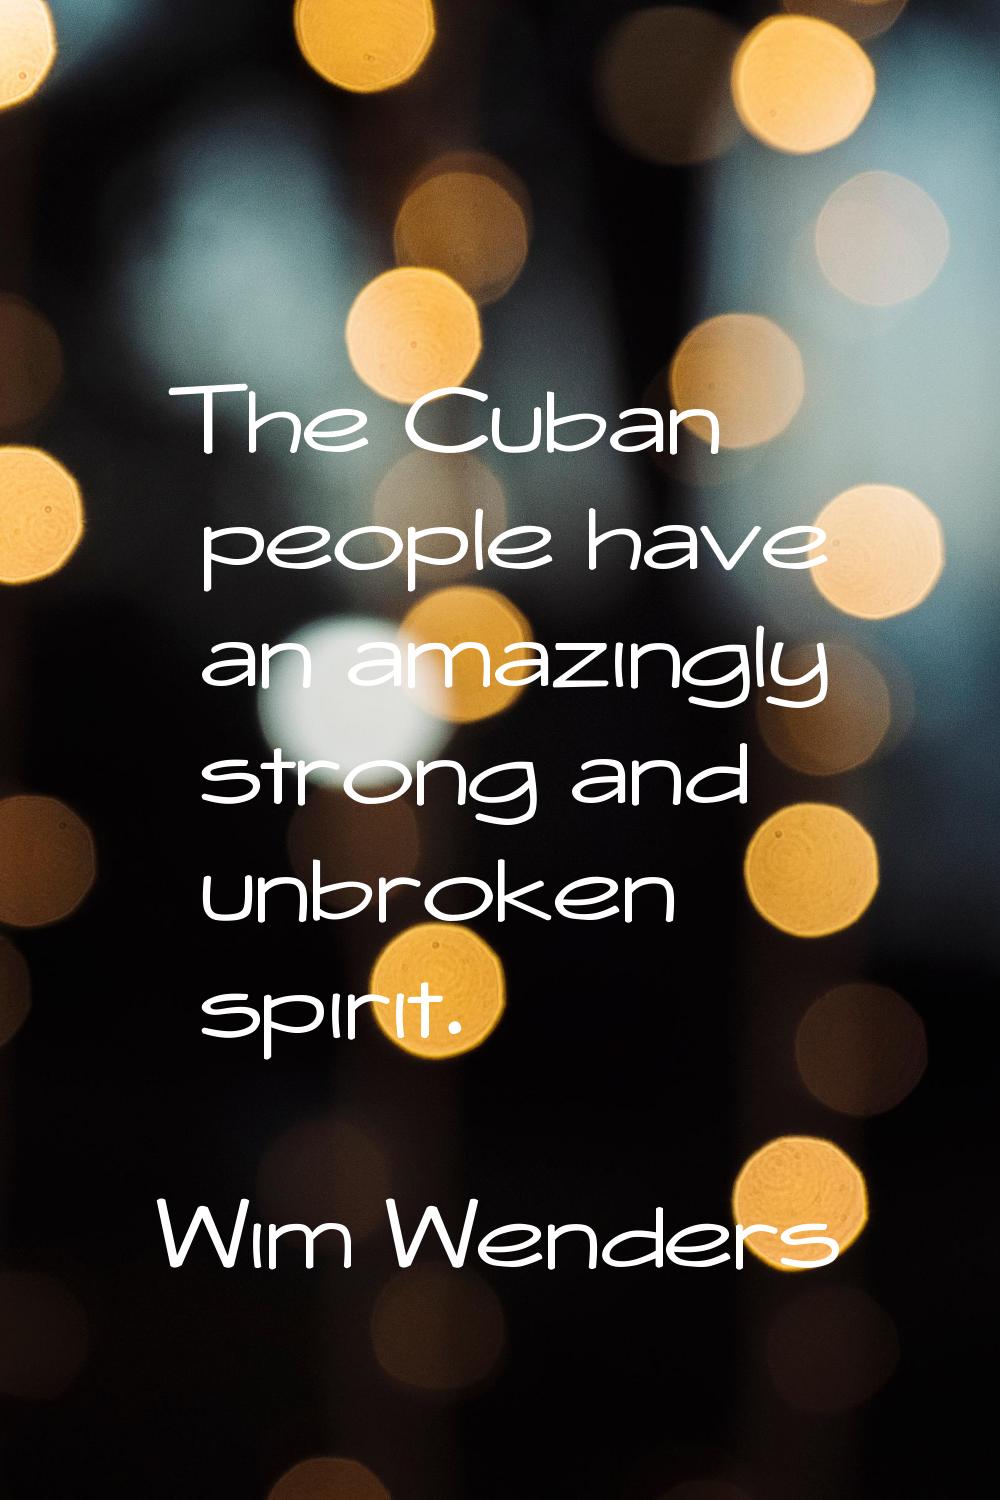 The Cuban people have an amazingly strong and unbroken spirit.